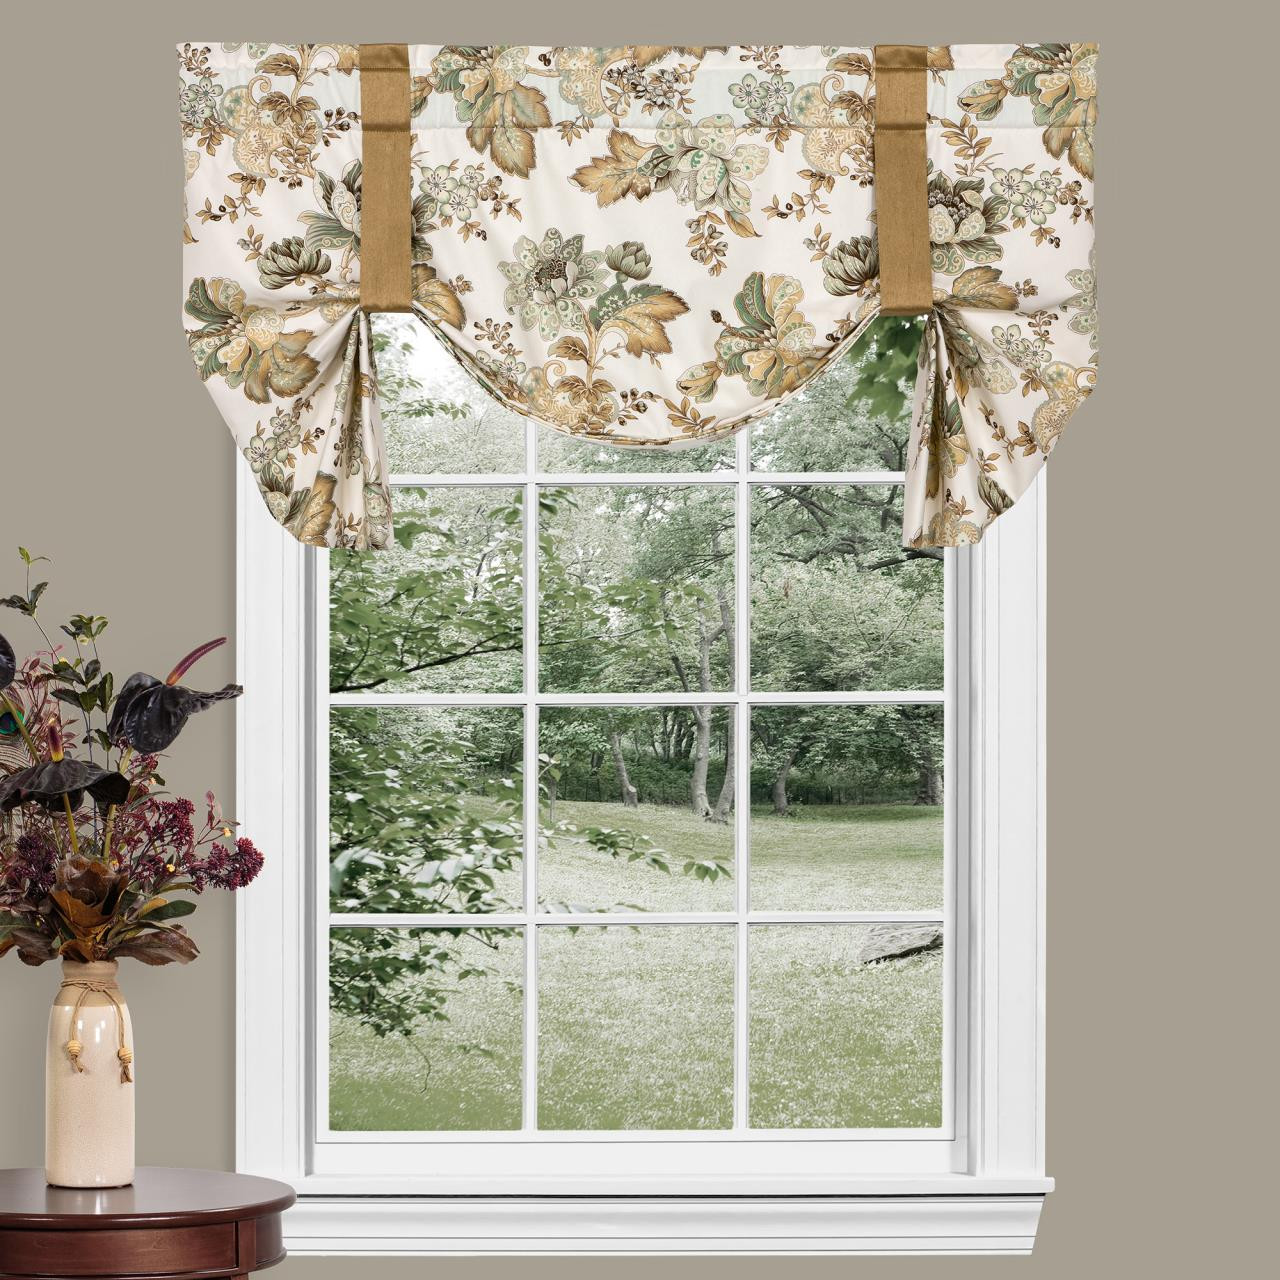 Pontoise Tie Up Curtain by Thomasville | Paul's Home Fashions